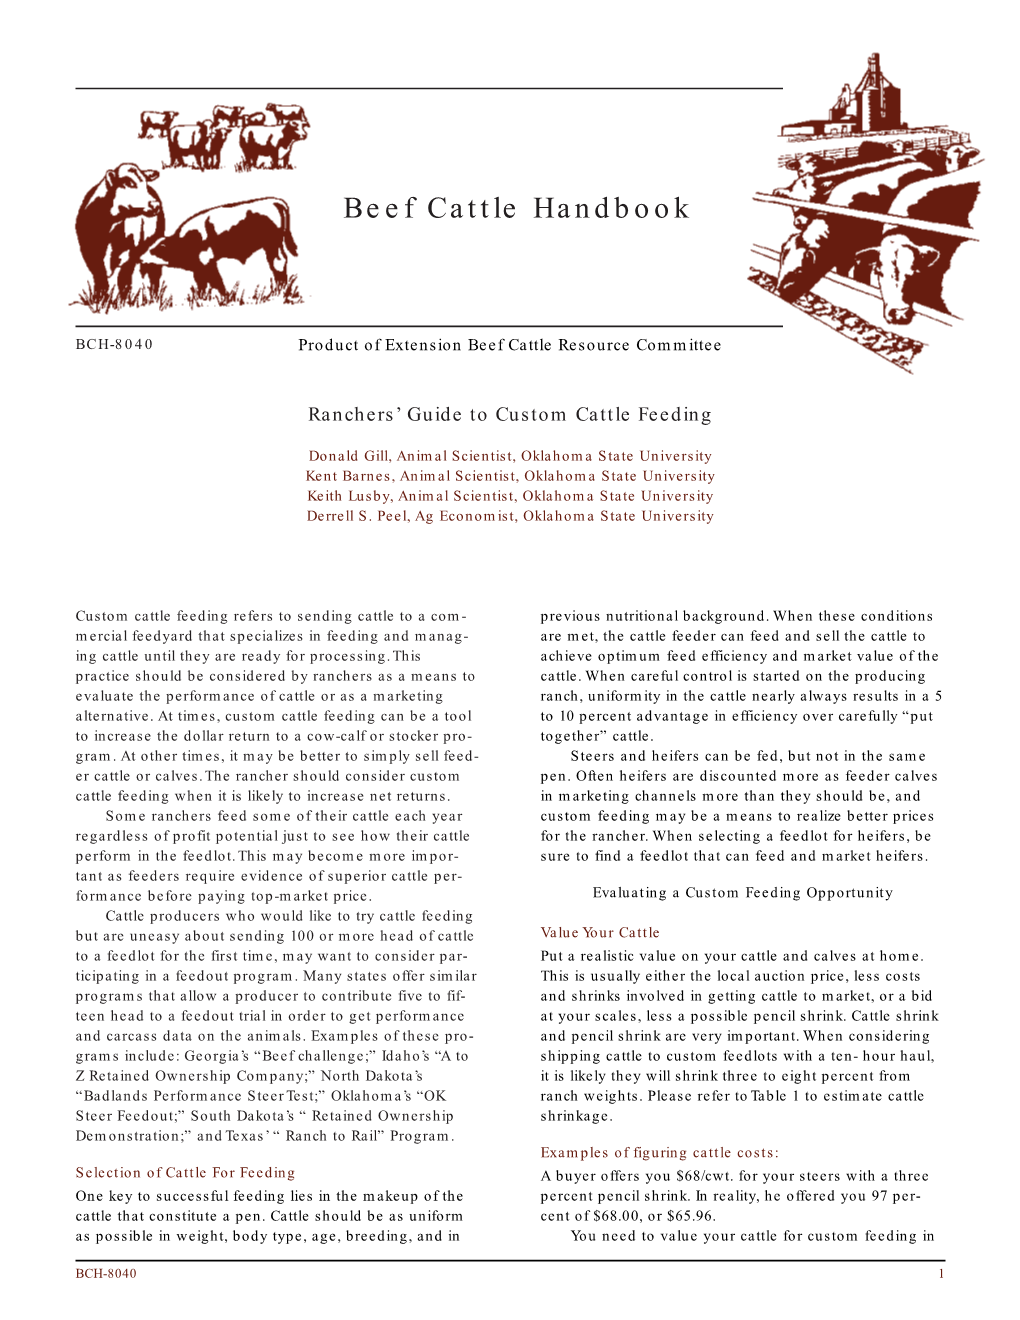 Ranchers' Guide to Custom Cattle Feeding